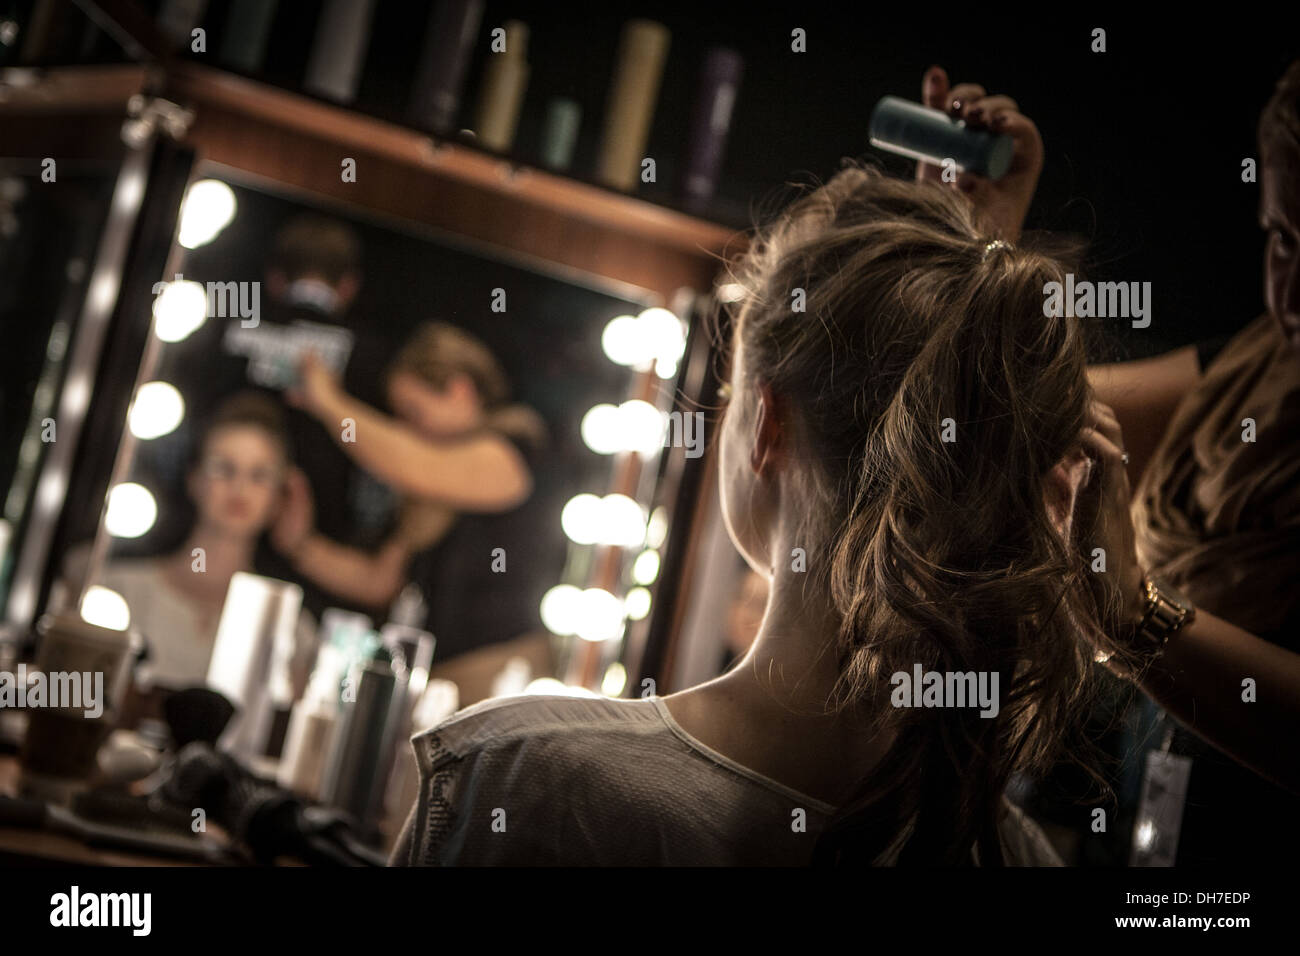 Model being prepared for fashion show. Stock Photo